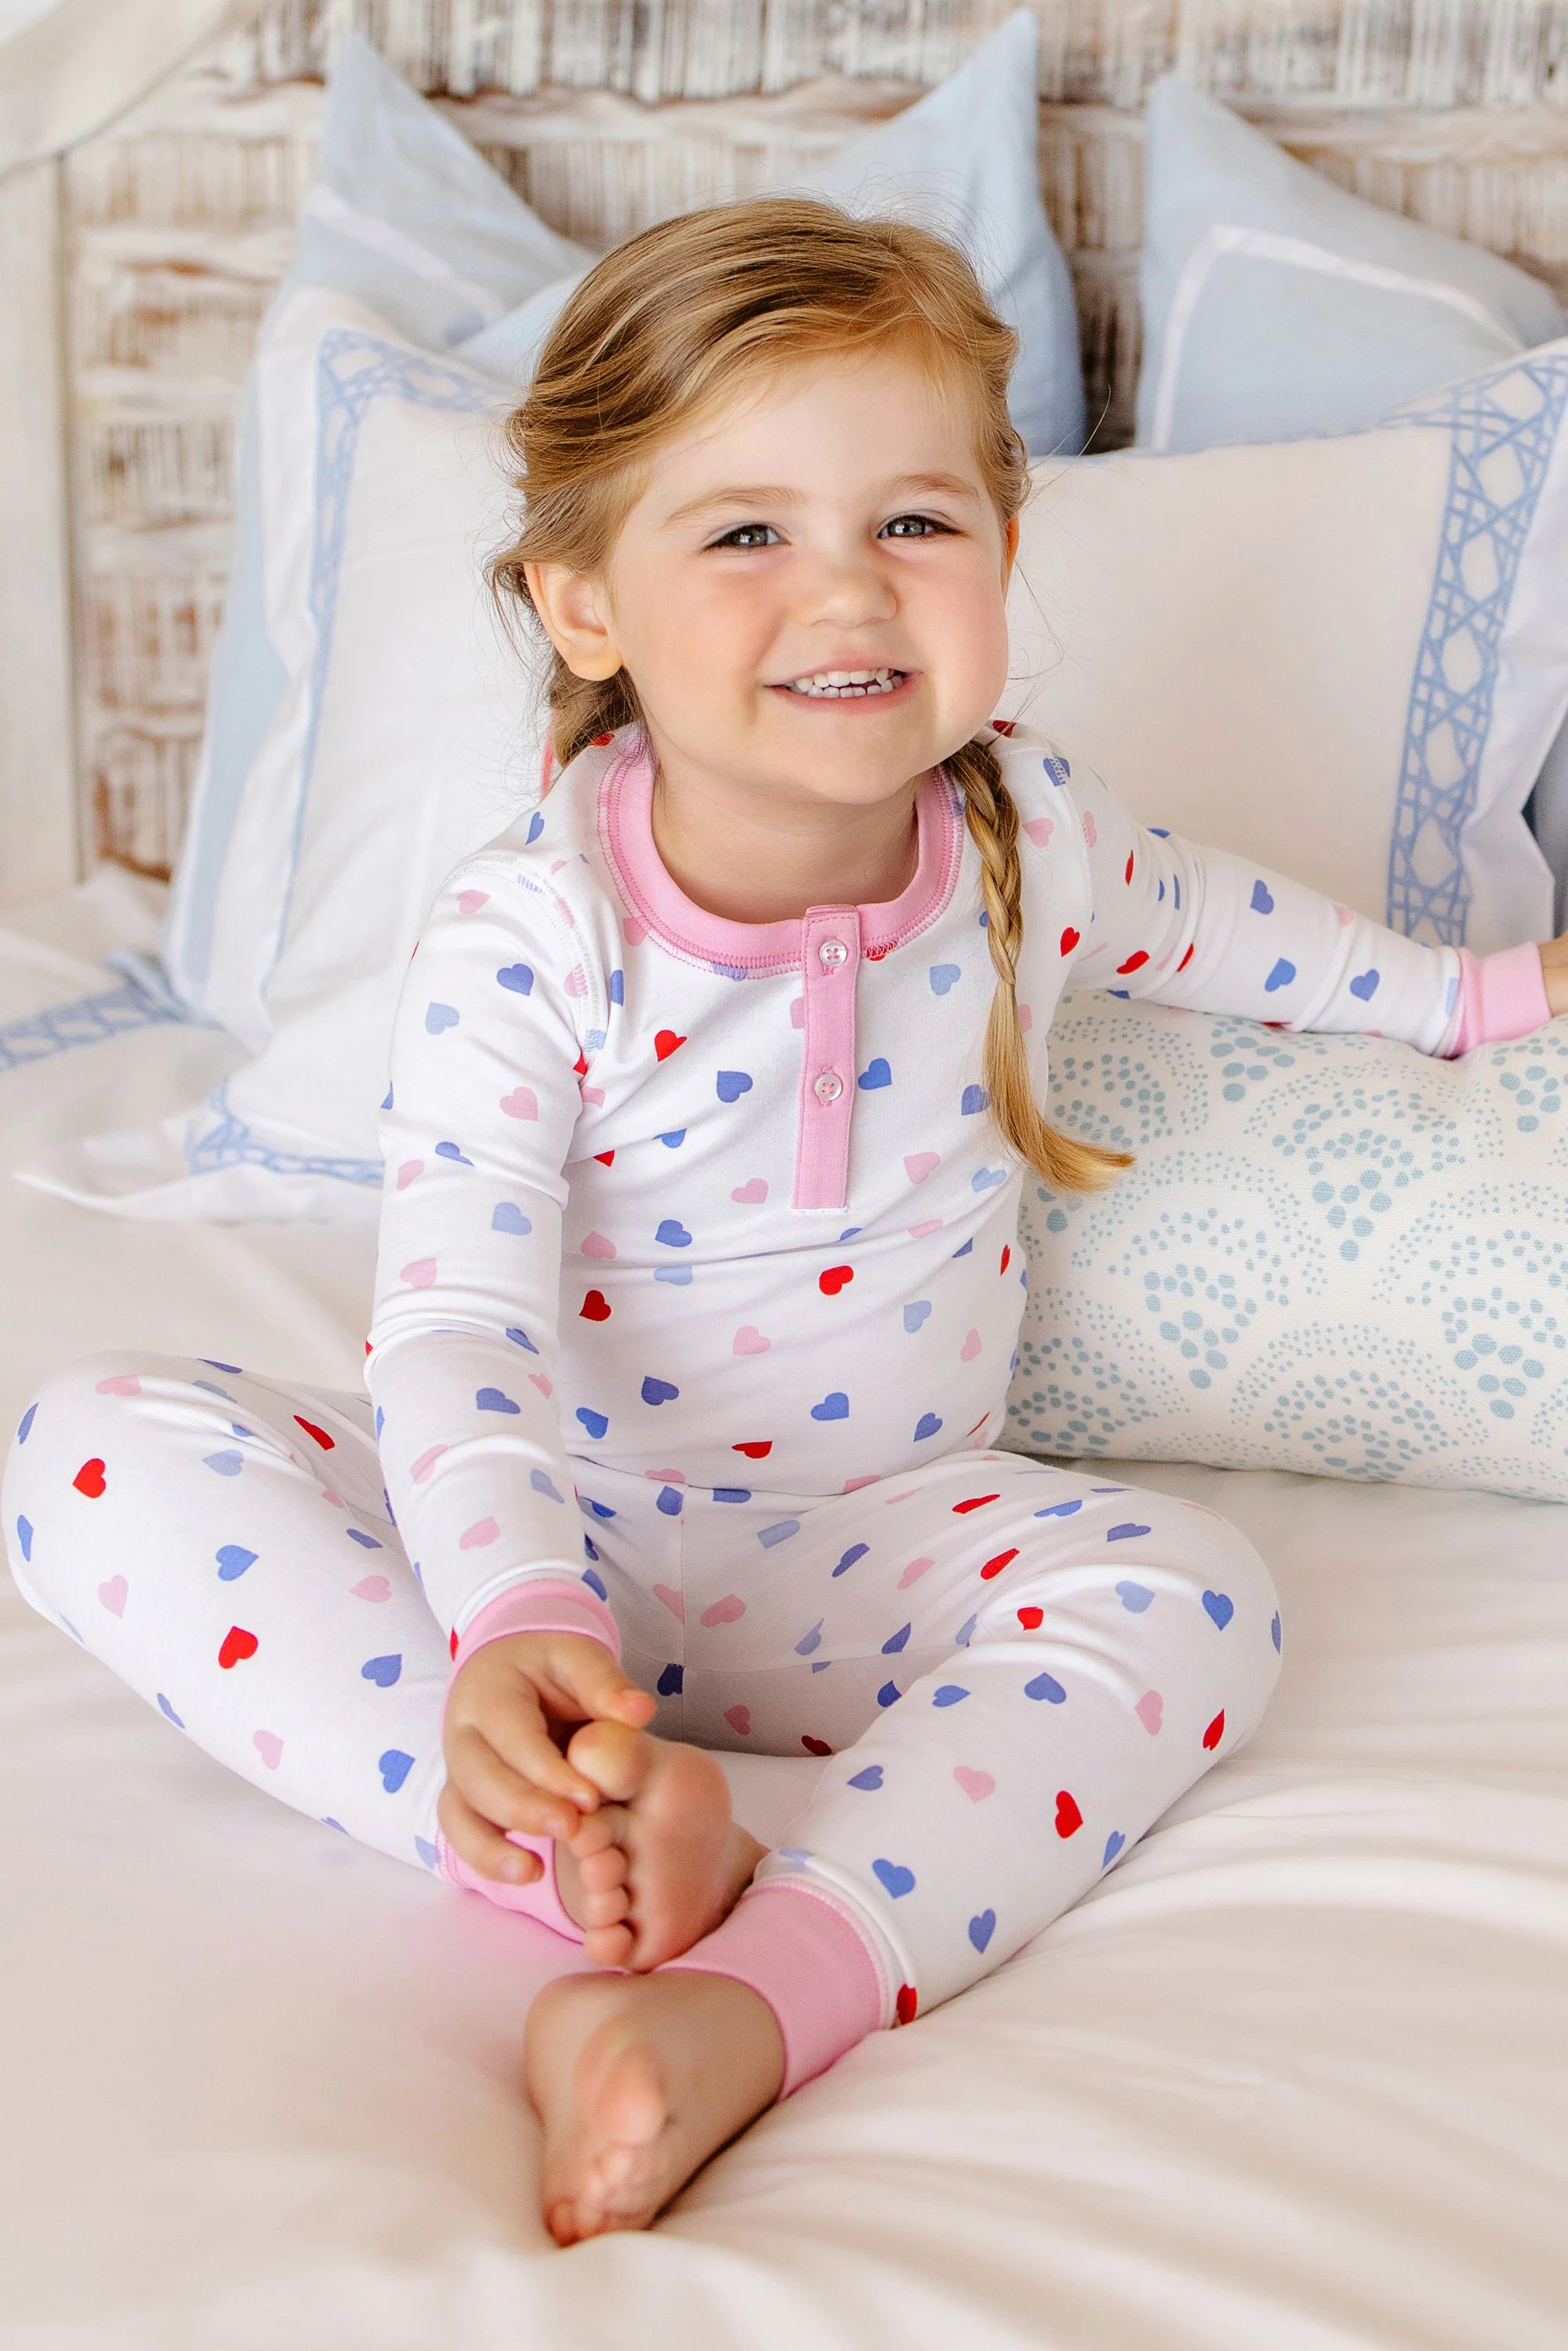 Sara Jane's Sweet Dream Set - Happy Hearts with Pier Party Pink | The Beaufort Bonnet Company